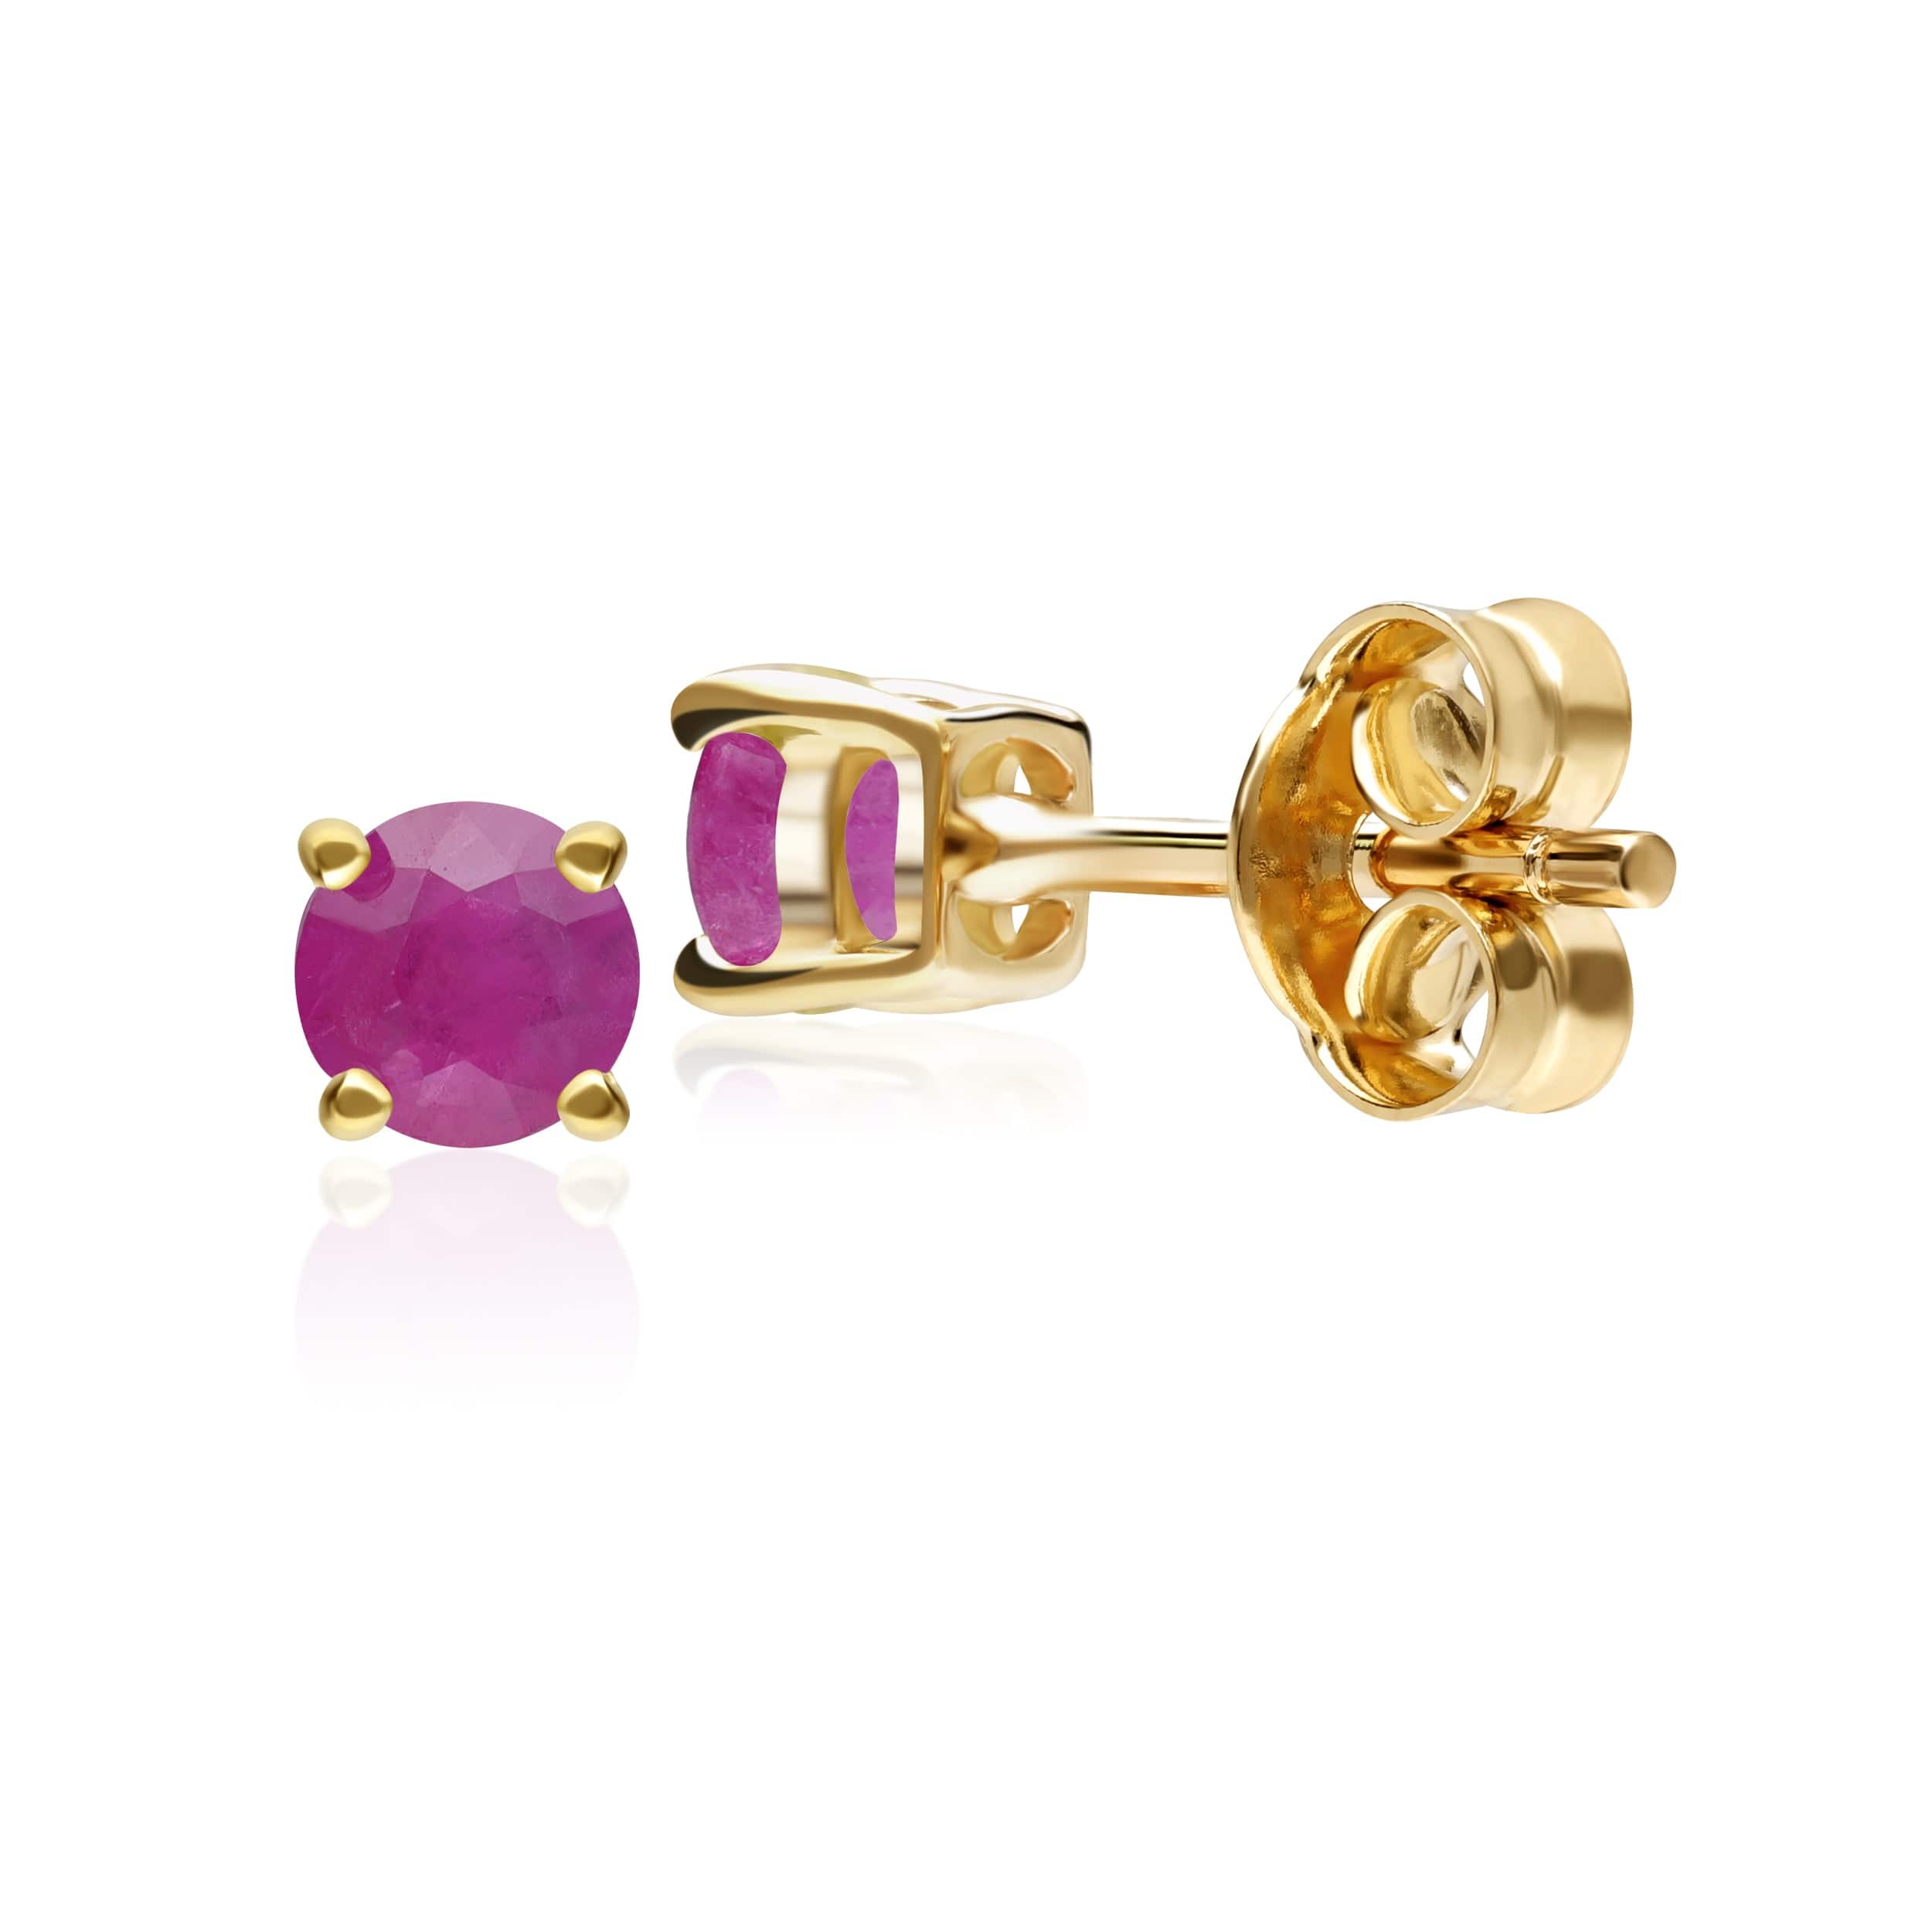 Ruby stud earrings in 9ct yellow gold image 1